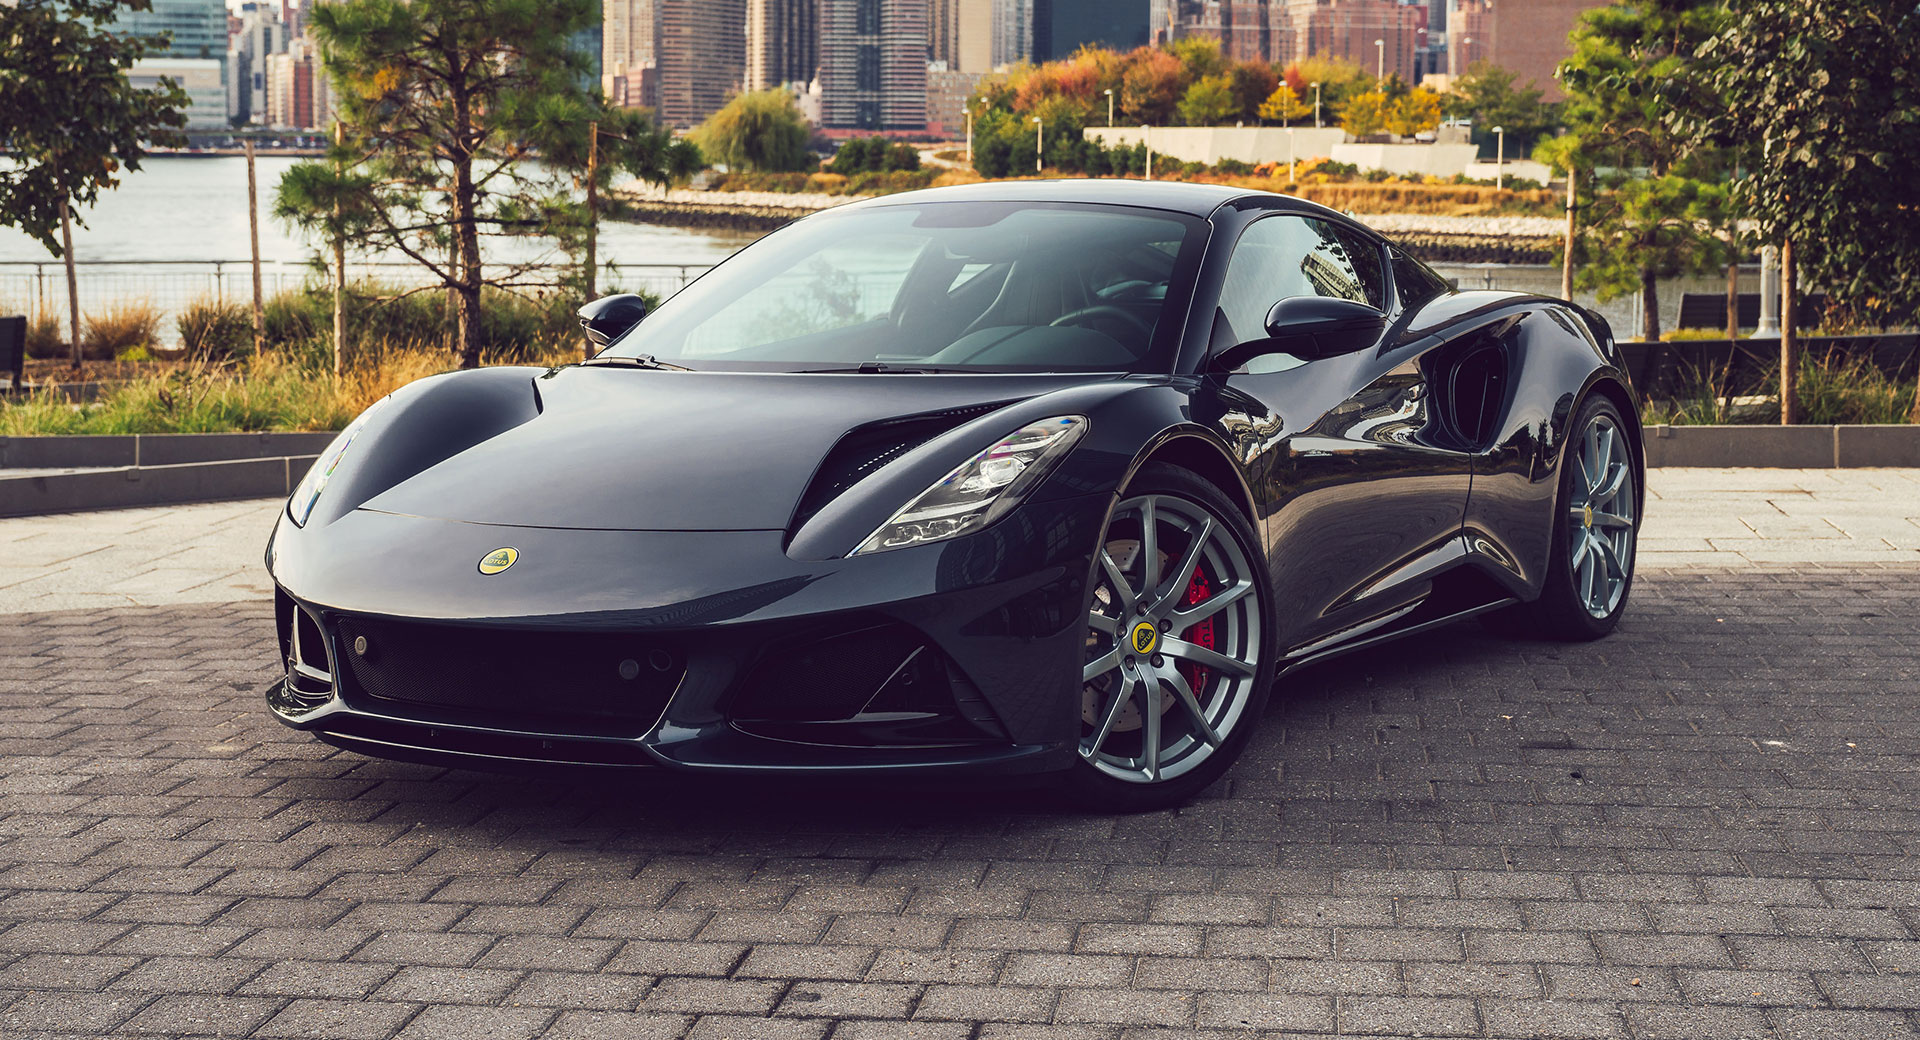 Lotus Emira V6 First Edition Announced For US, Starts At $93,900